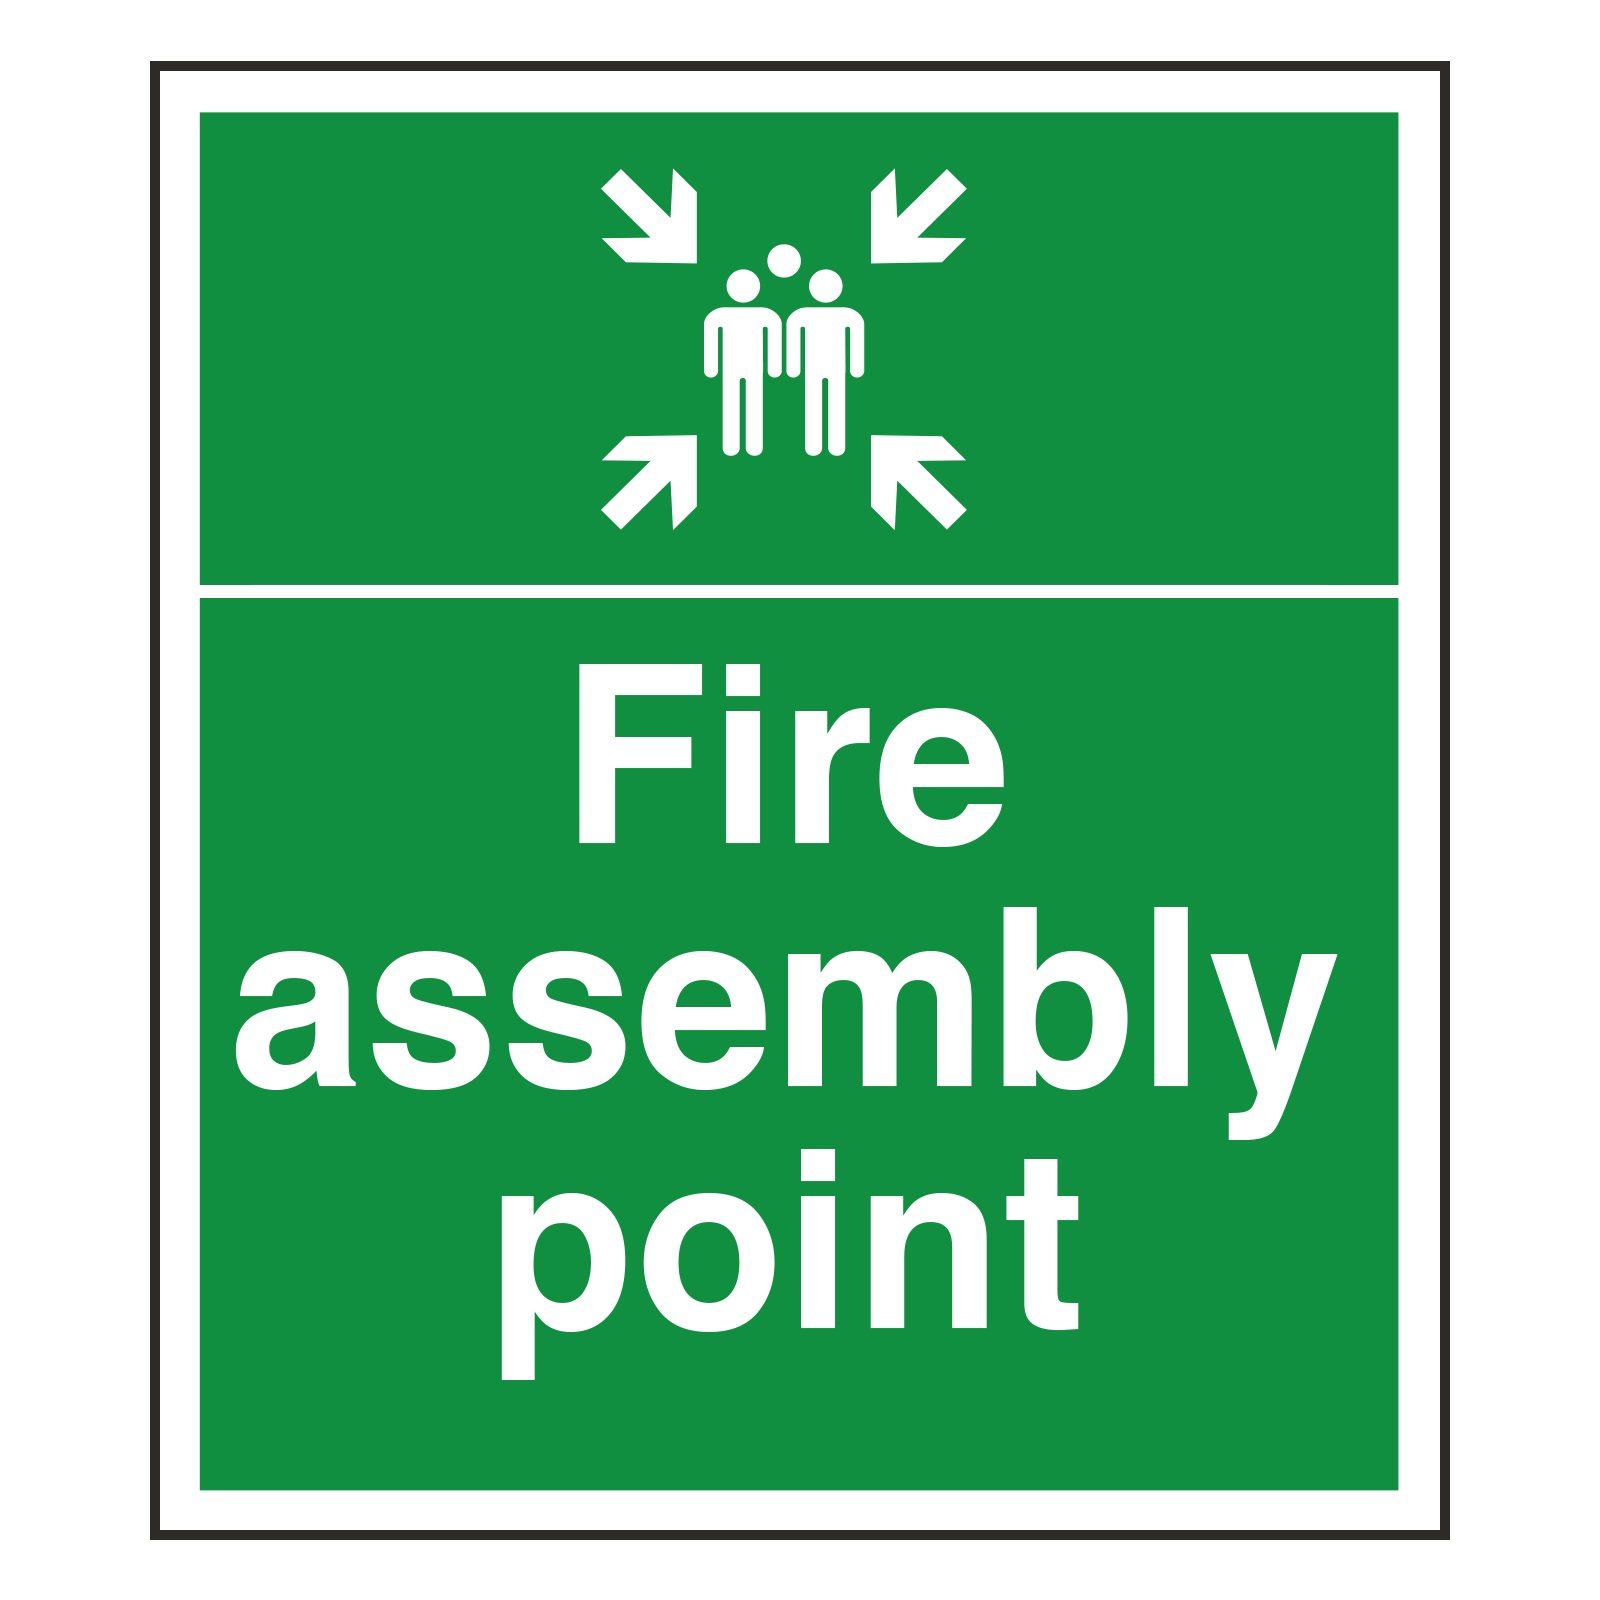 wall-mounted-fire-assembly-point-sign